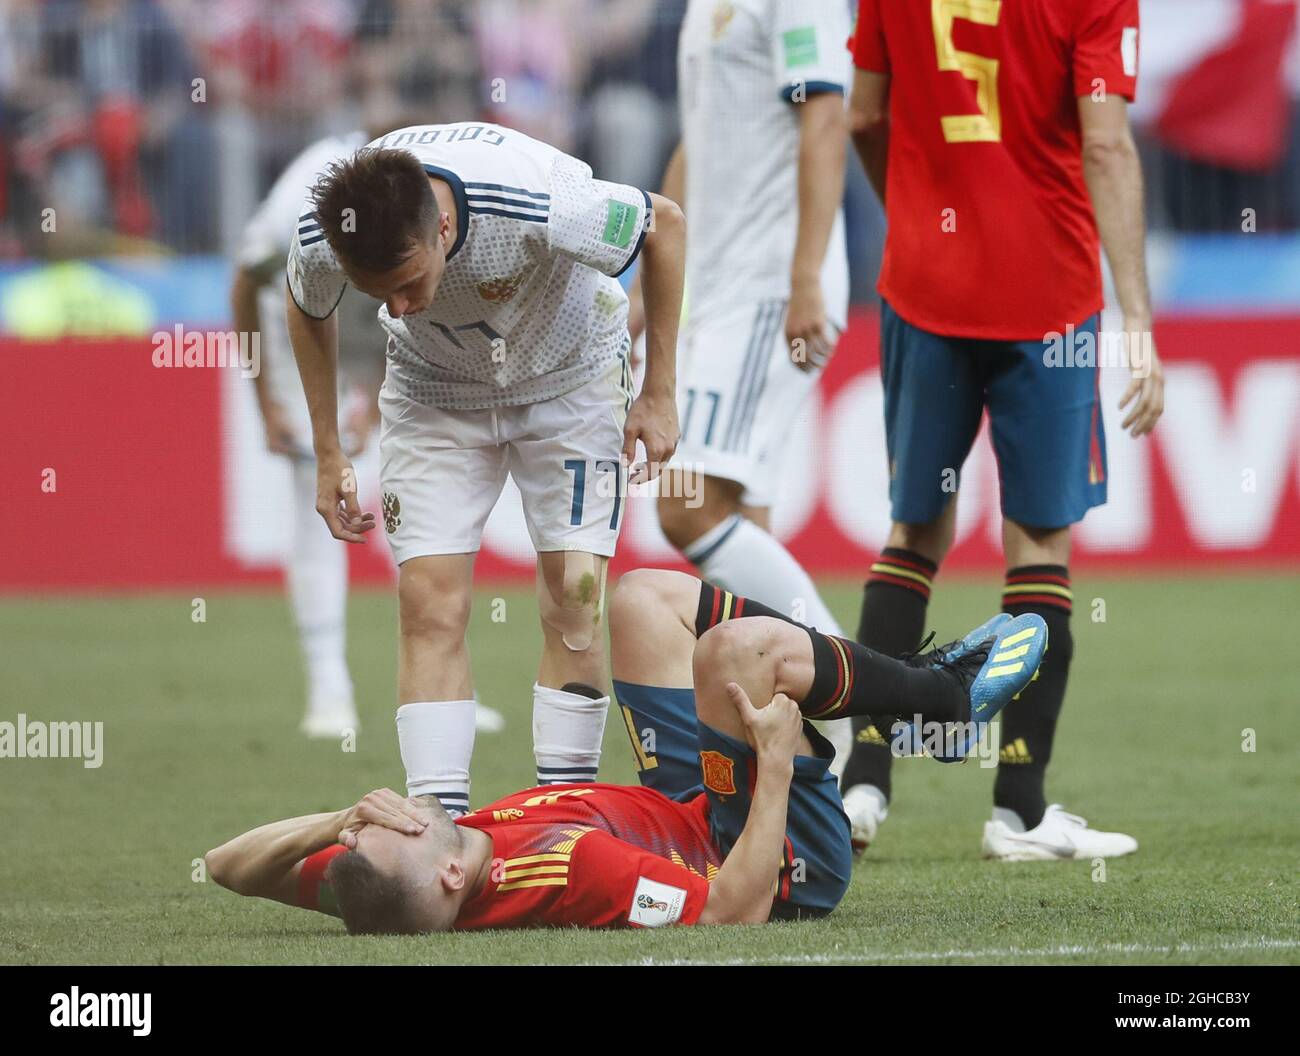 Aleksandr Samedov of Russia checks on Jordi Alba of Spain during the FIFA World Cup 2018 Round of 16 match at the Luzhniki Stadium, Moscow. Picture date 1st July 2018. Picture credit should read: David Klein/Sportimage via PA Images Stock Photo